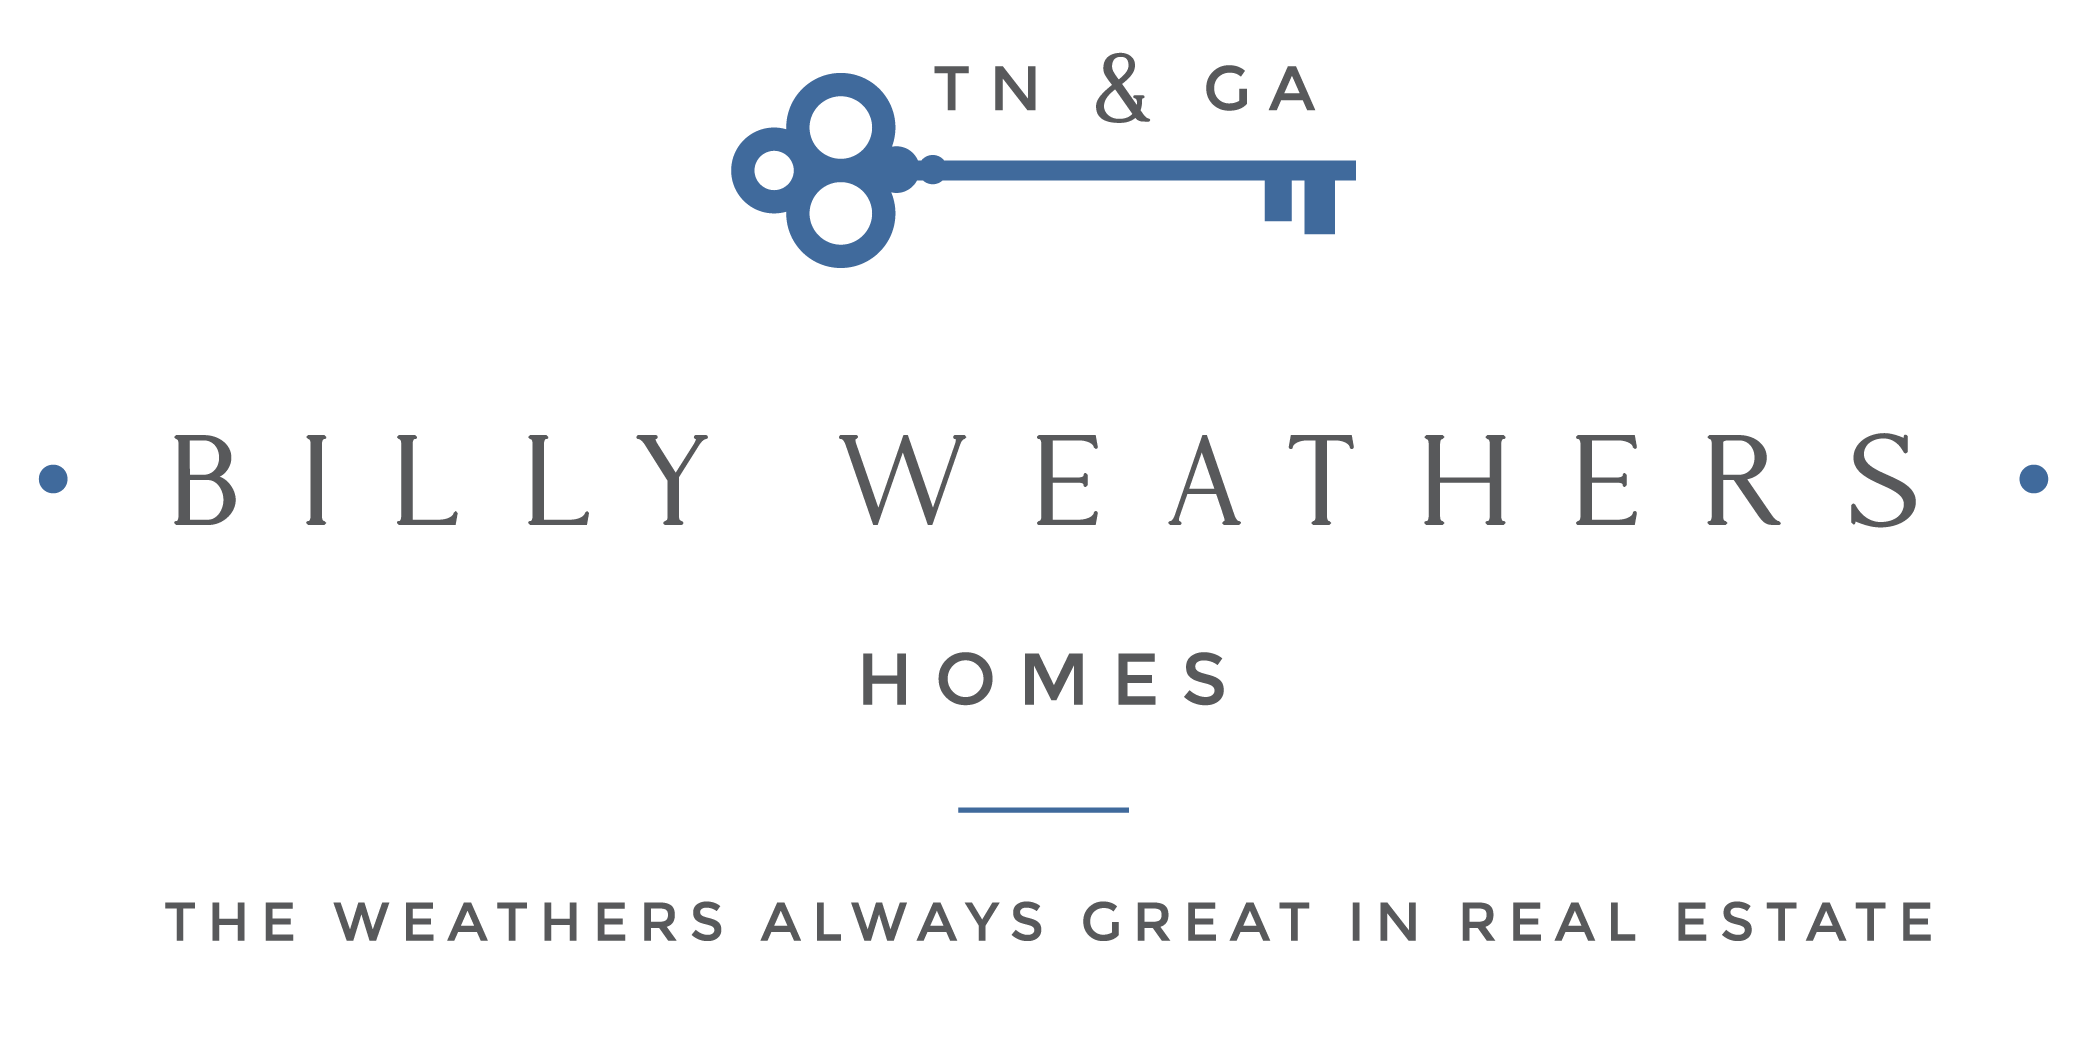 Billy Weathers Homes | Main Logo for Realtor | Nicole Victory Design